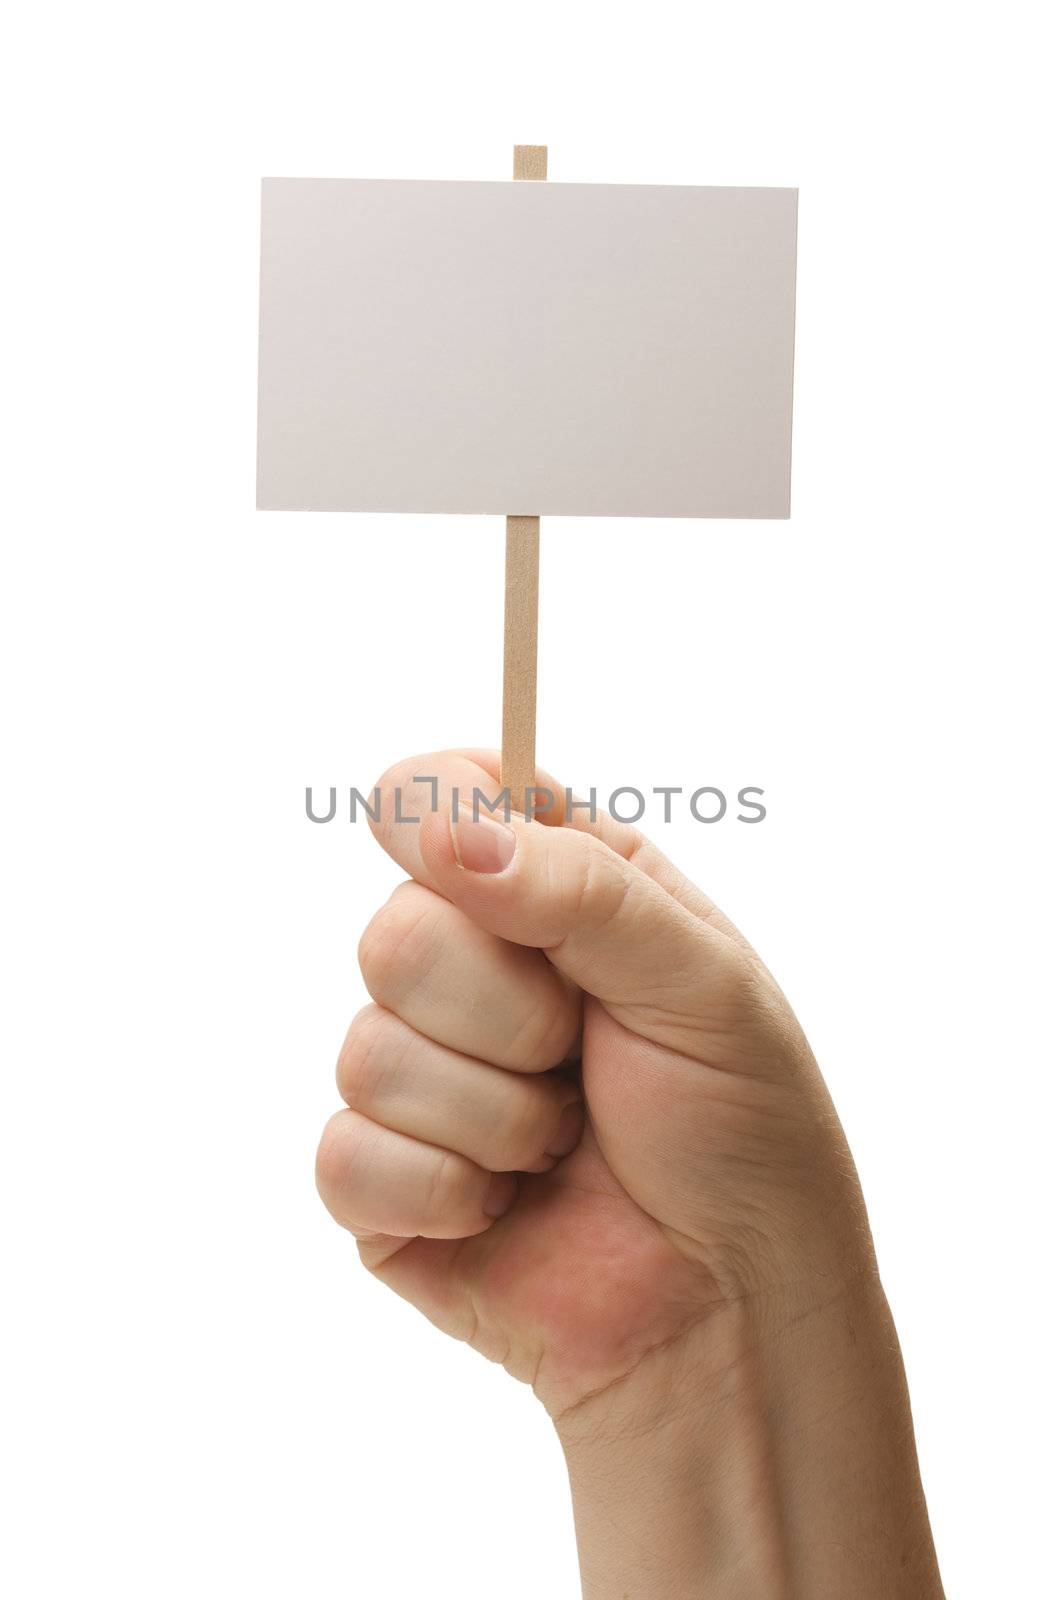 Blank Sign In Fist Isolated on A White Background.